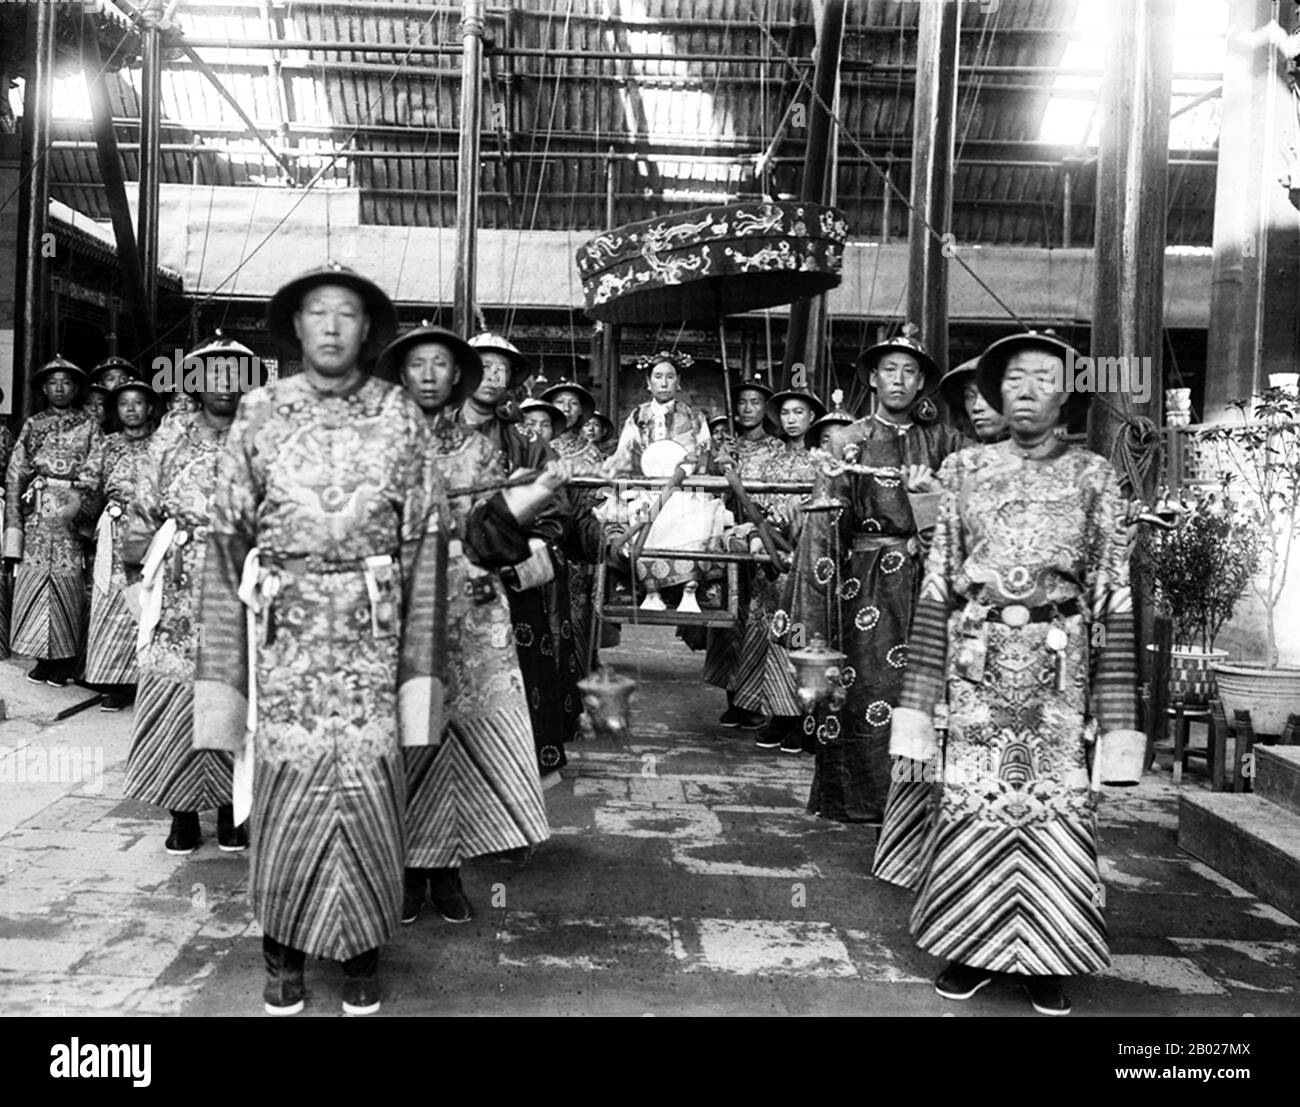 Empress Dowager Cixi (Wade–Giles: Tz'u-Hsi, 29 November 1835 – 15 November 1908) of the Manchu Yehe Nara Clan, was a powerful and charismatic figure who became the de facto ruler of the Manchu Qing Dynasty in China for 47 years from 1861 to her death in 1908. Stock Photo